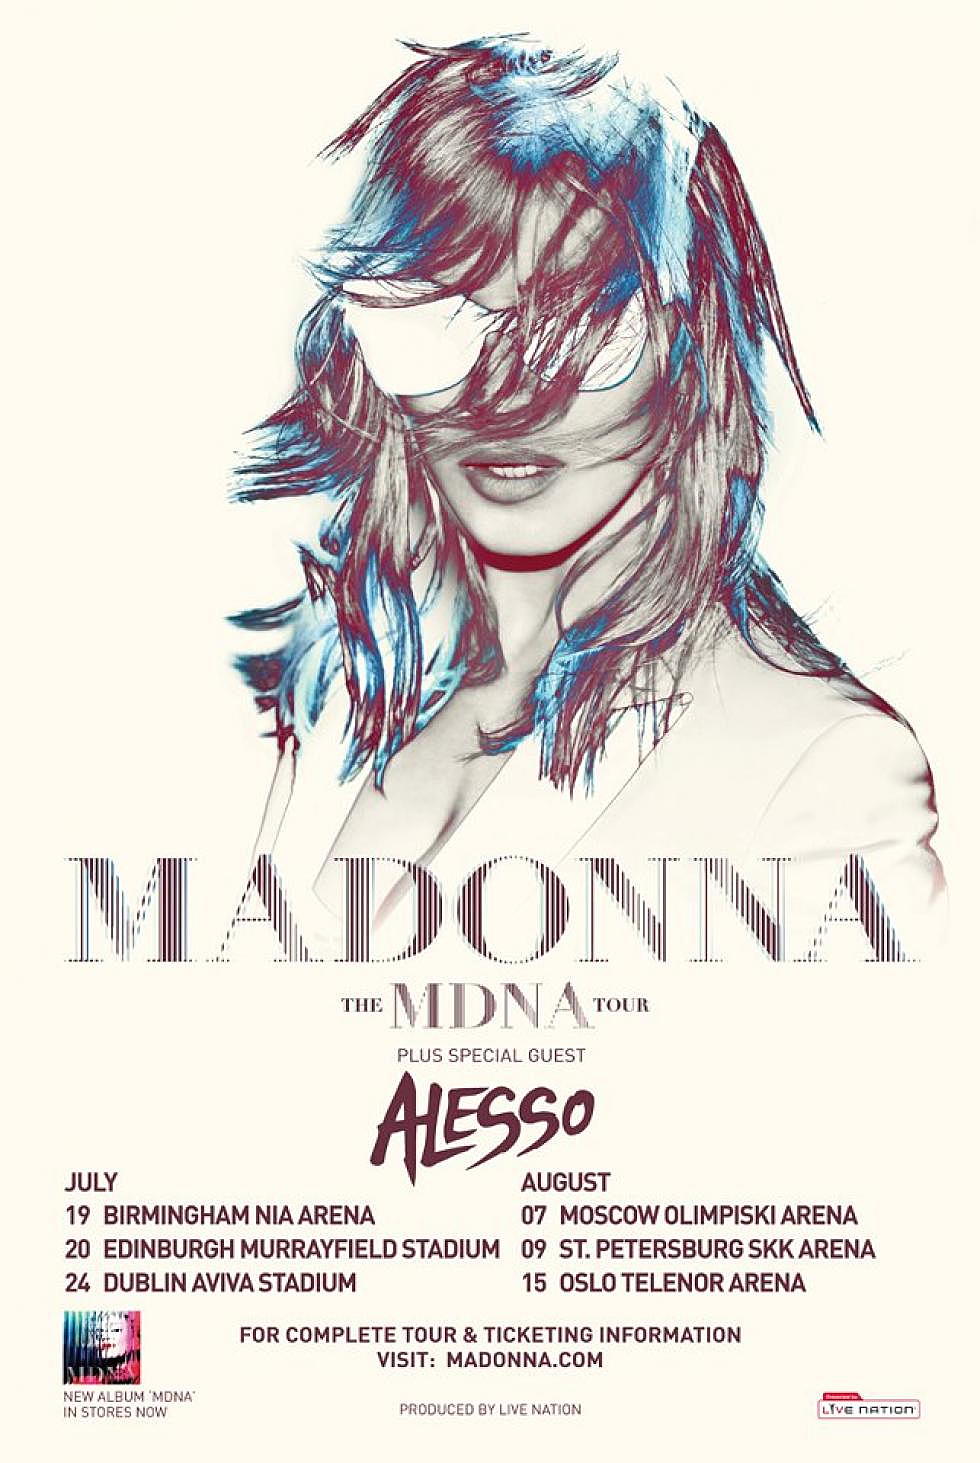 Alesso to support Madonna on MDNA tour